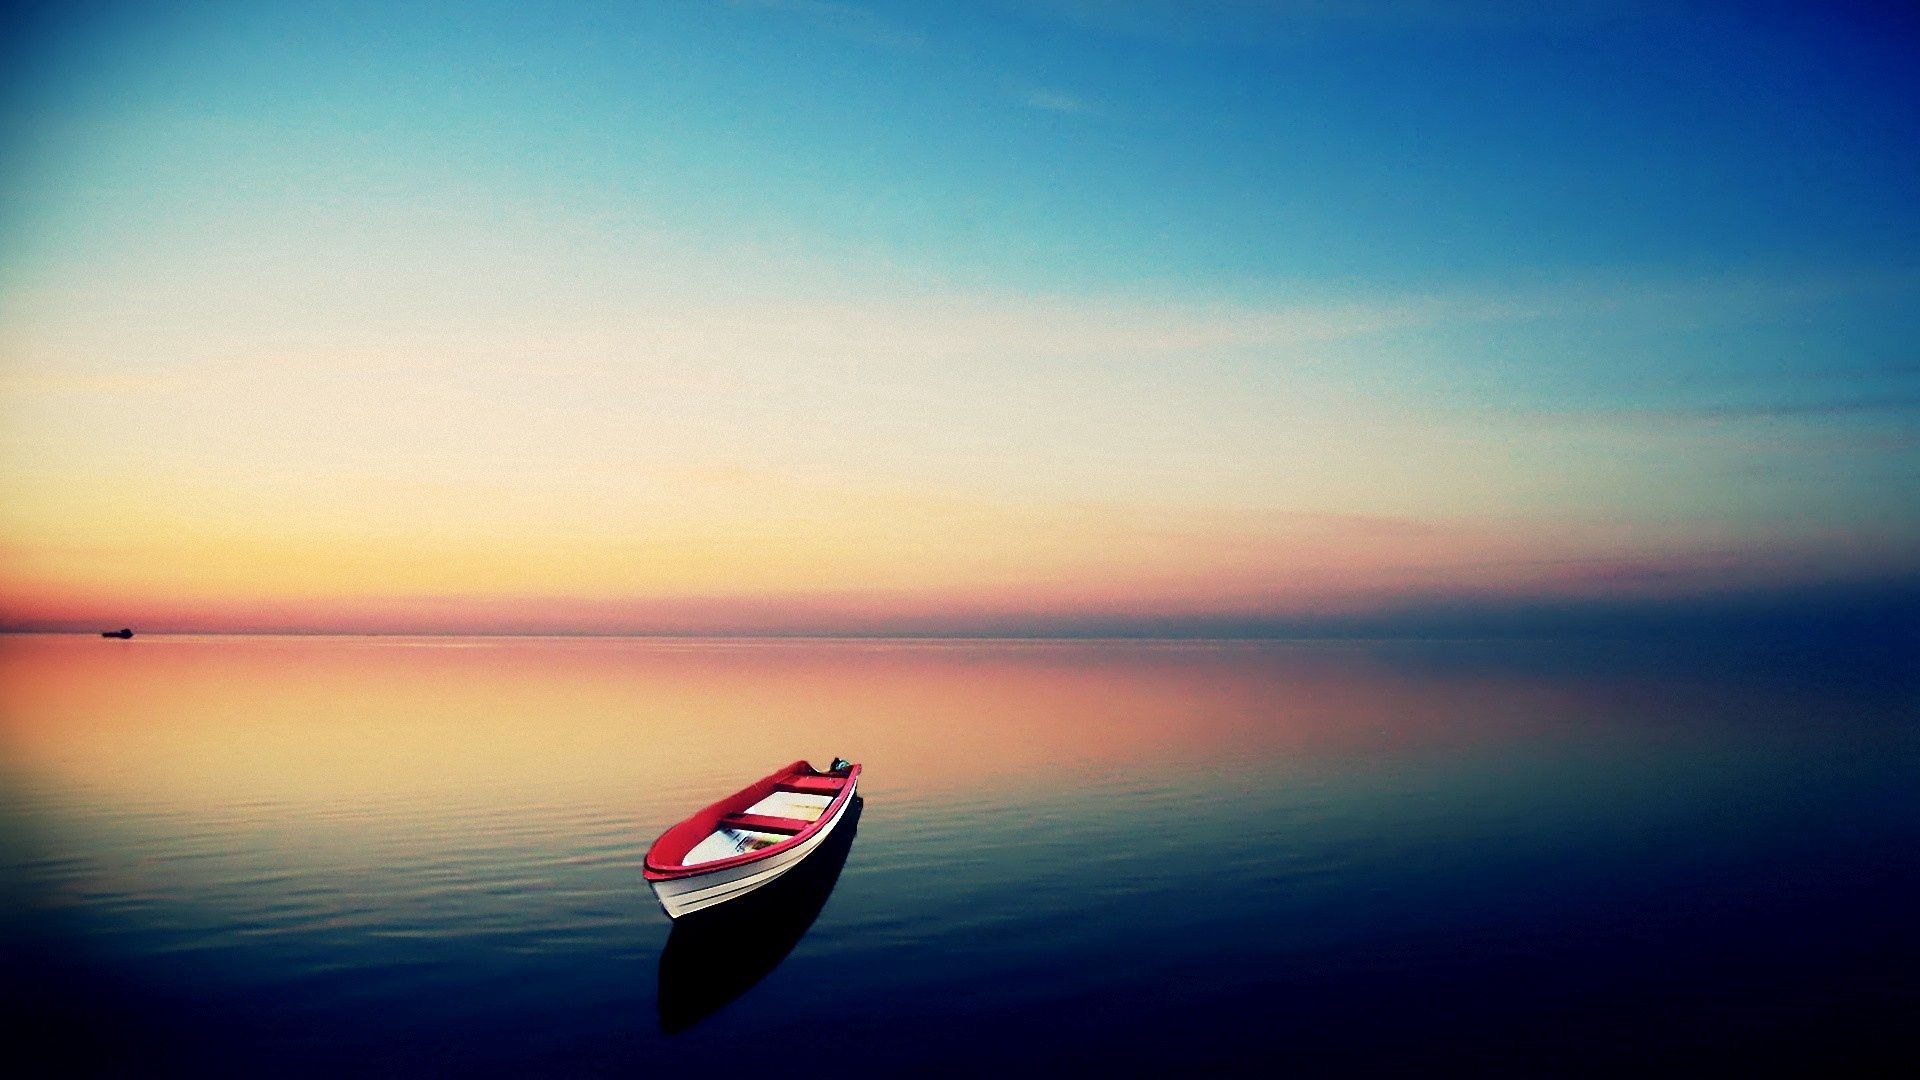 Mobile wallpaper: Boat, Water Surface, Evening, Nature, Horizon, Sea,  Loneliness, Sunset, 61512 download the picture for free.